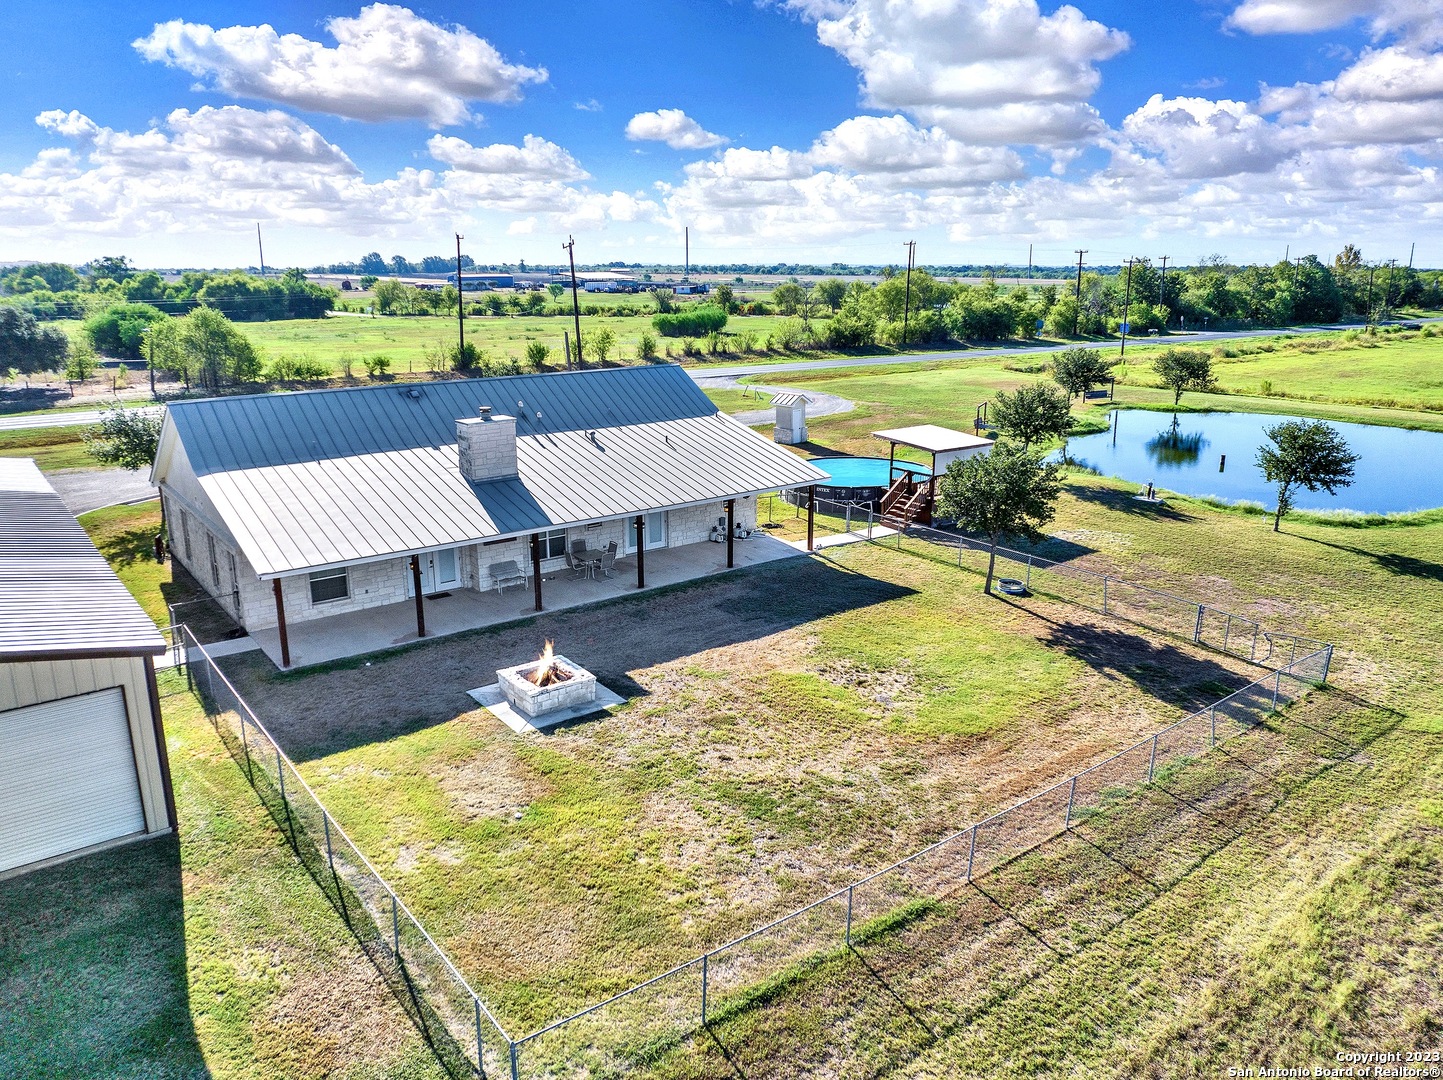 Photo of 16141 W Fm 2790 S in Lytle, TX